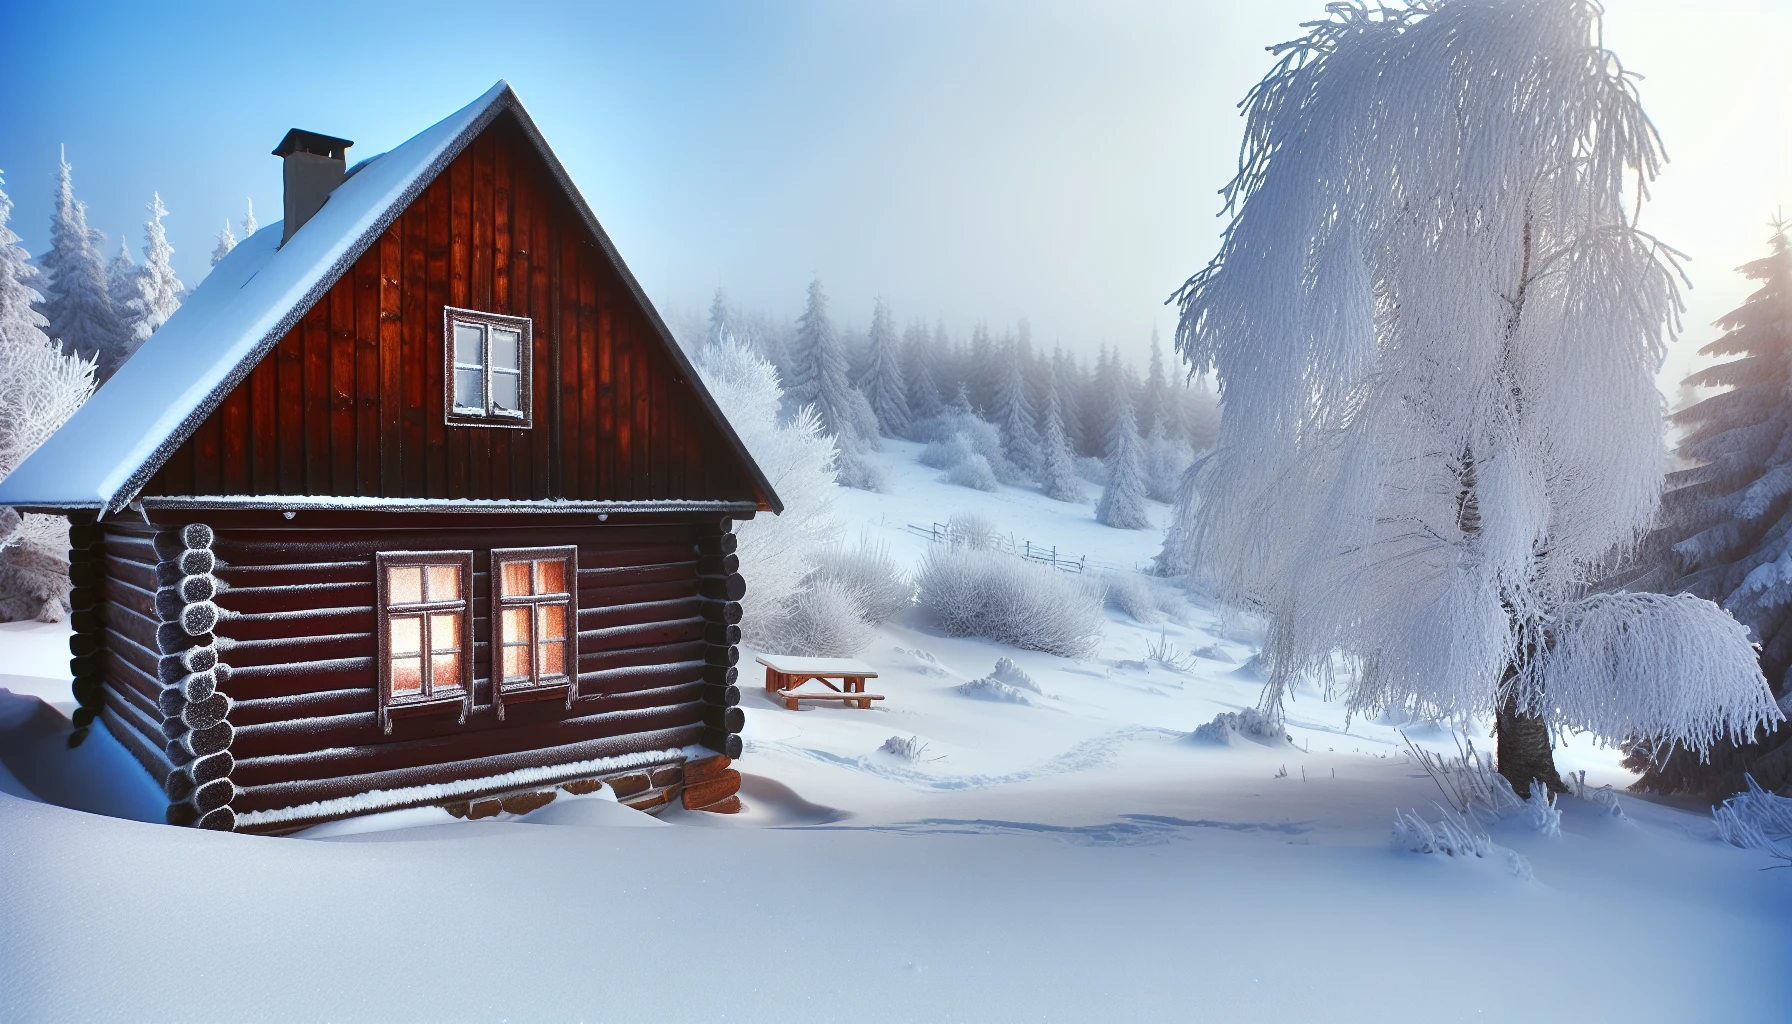 Enthralling Tales for the Cold Winter Night: A cozy cabin in the snowy wilderness